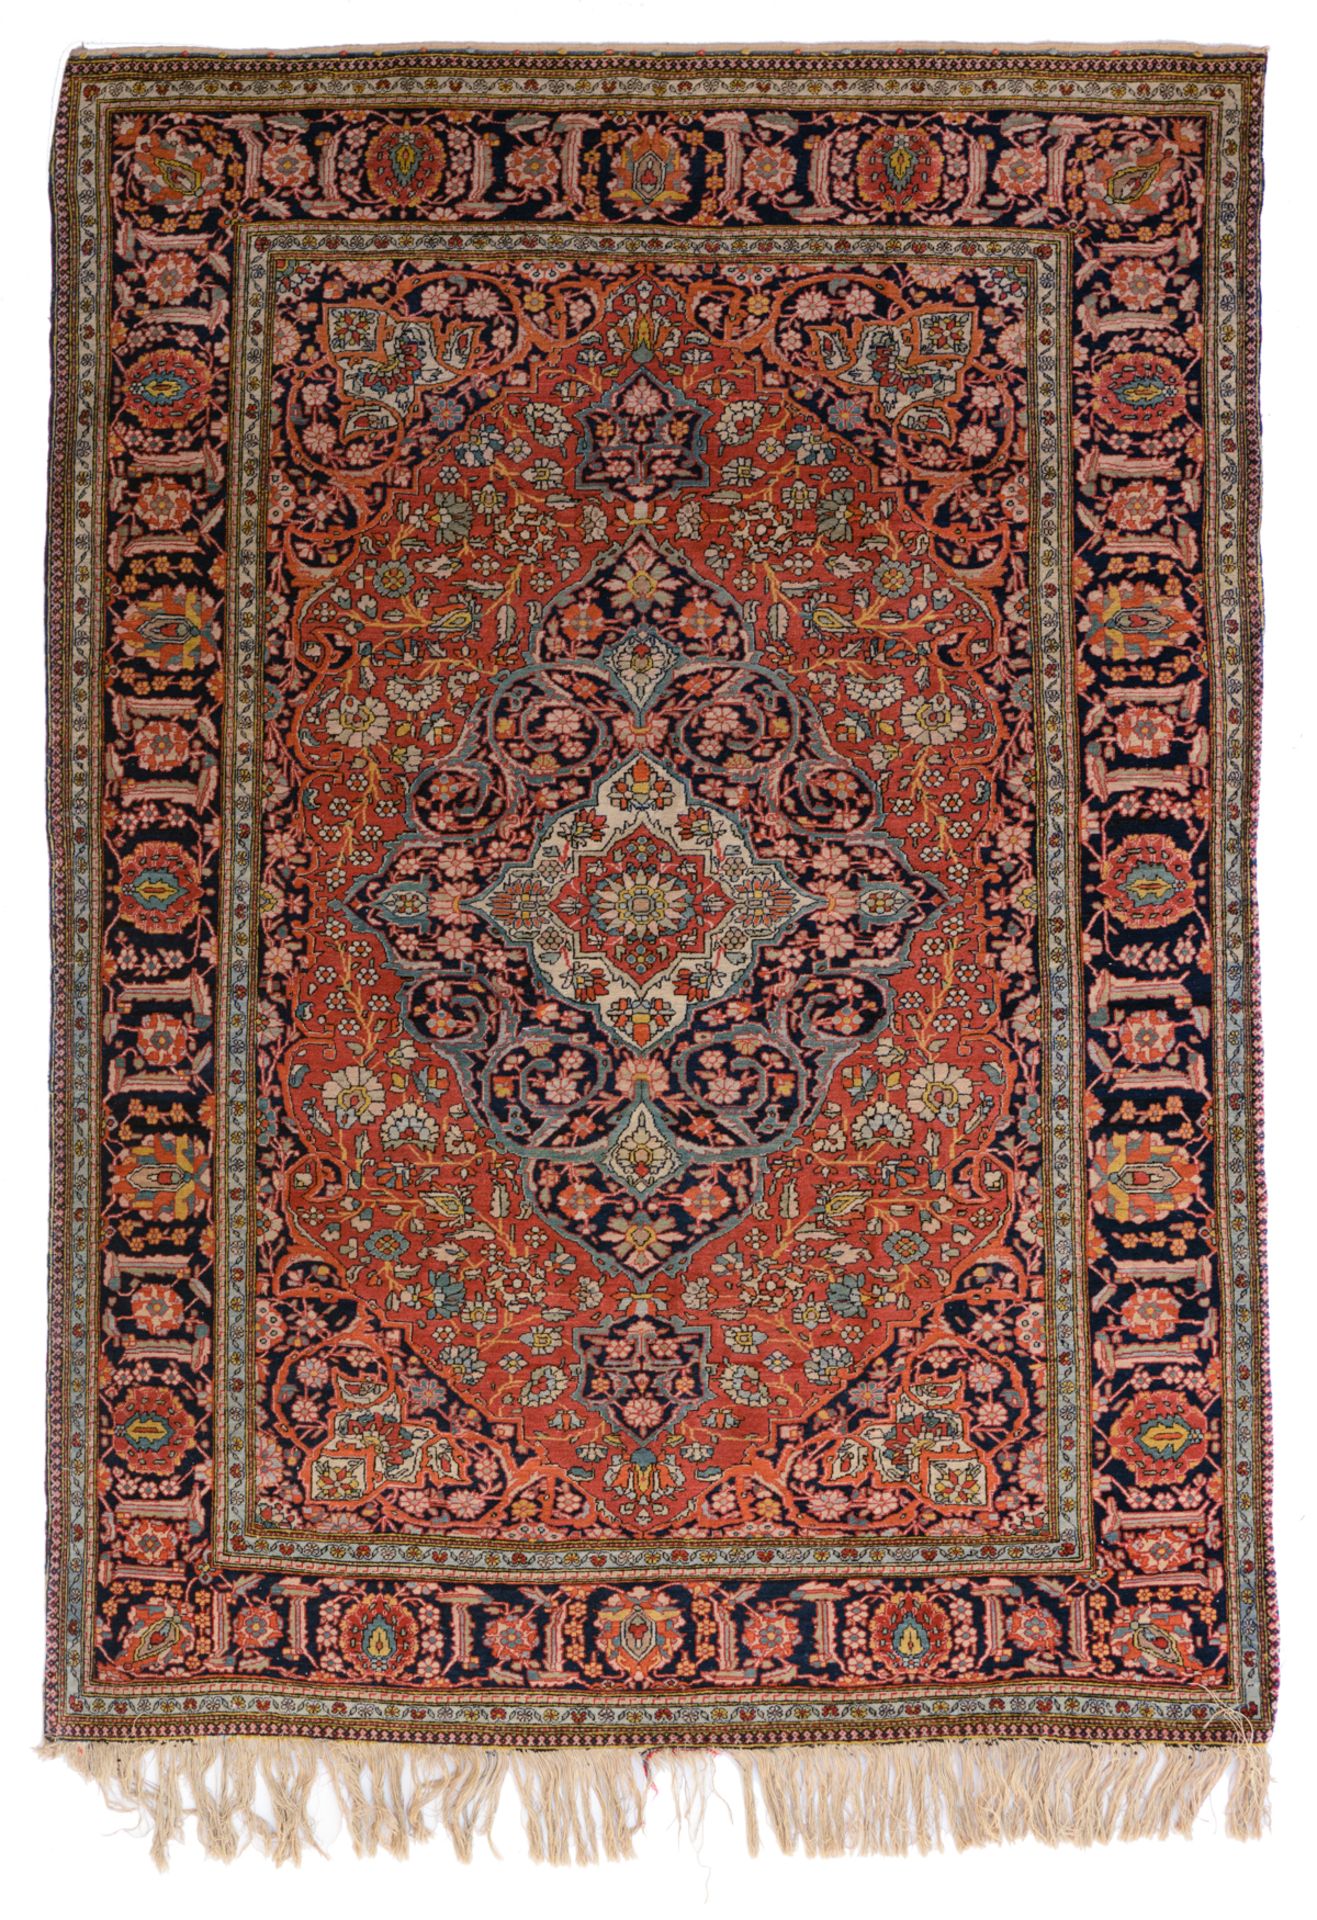 An Oriental Kashan rug, workshop of Atorie Mohtacham, floral decorated, 137 x 197 cm